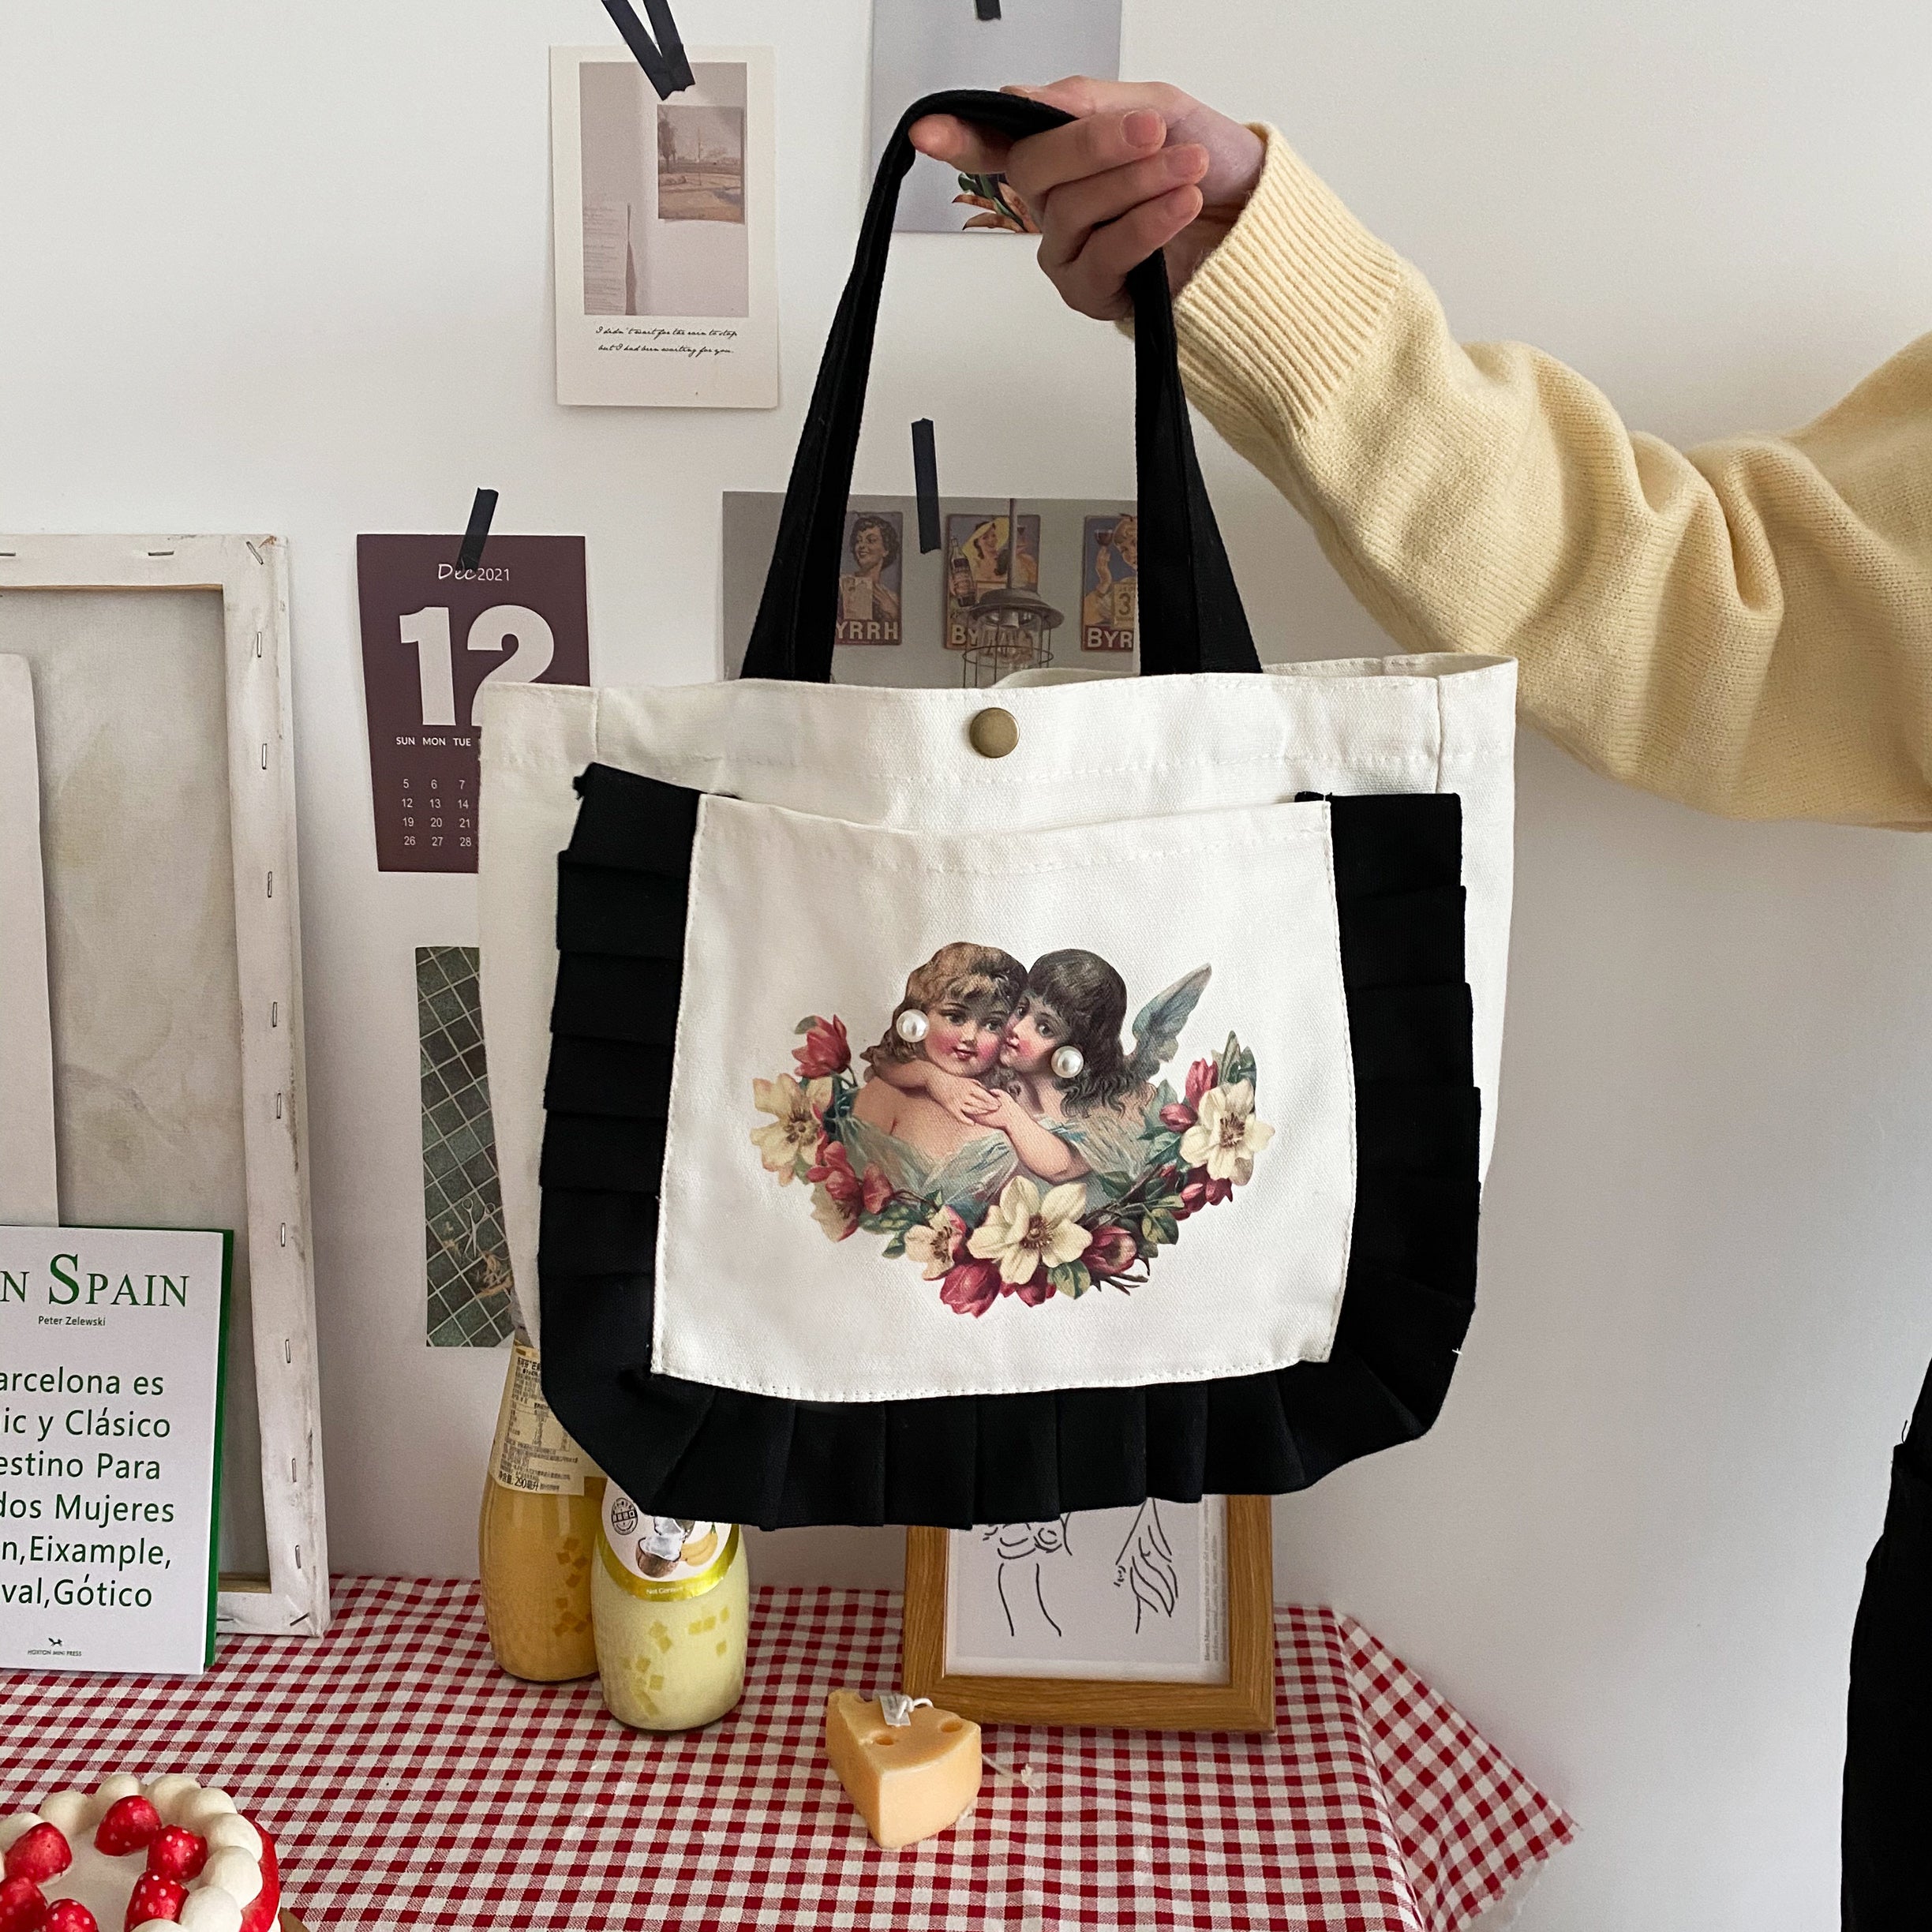 Simple literary cute lunch bag SS2539